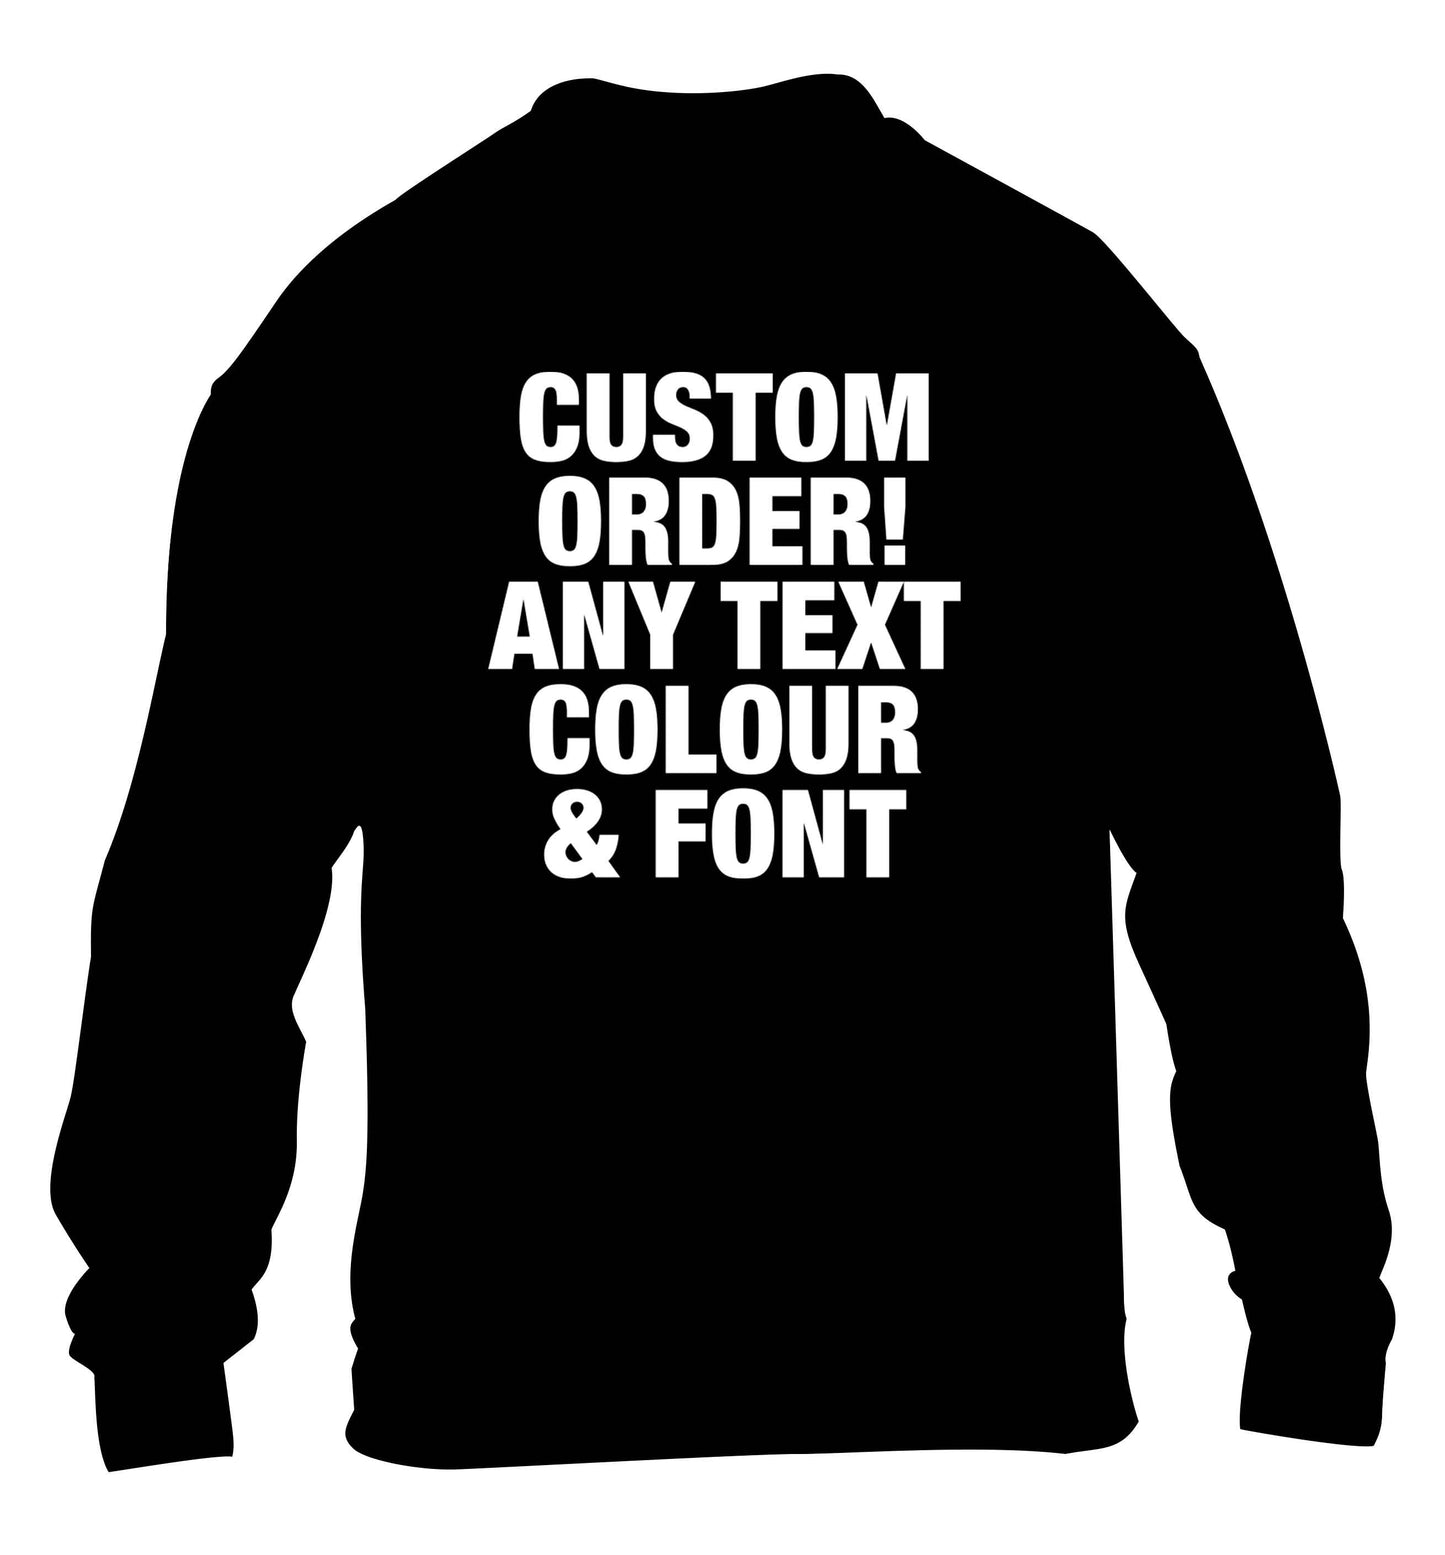 Custom order any text colour and font children's black sweater 12-13 Years